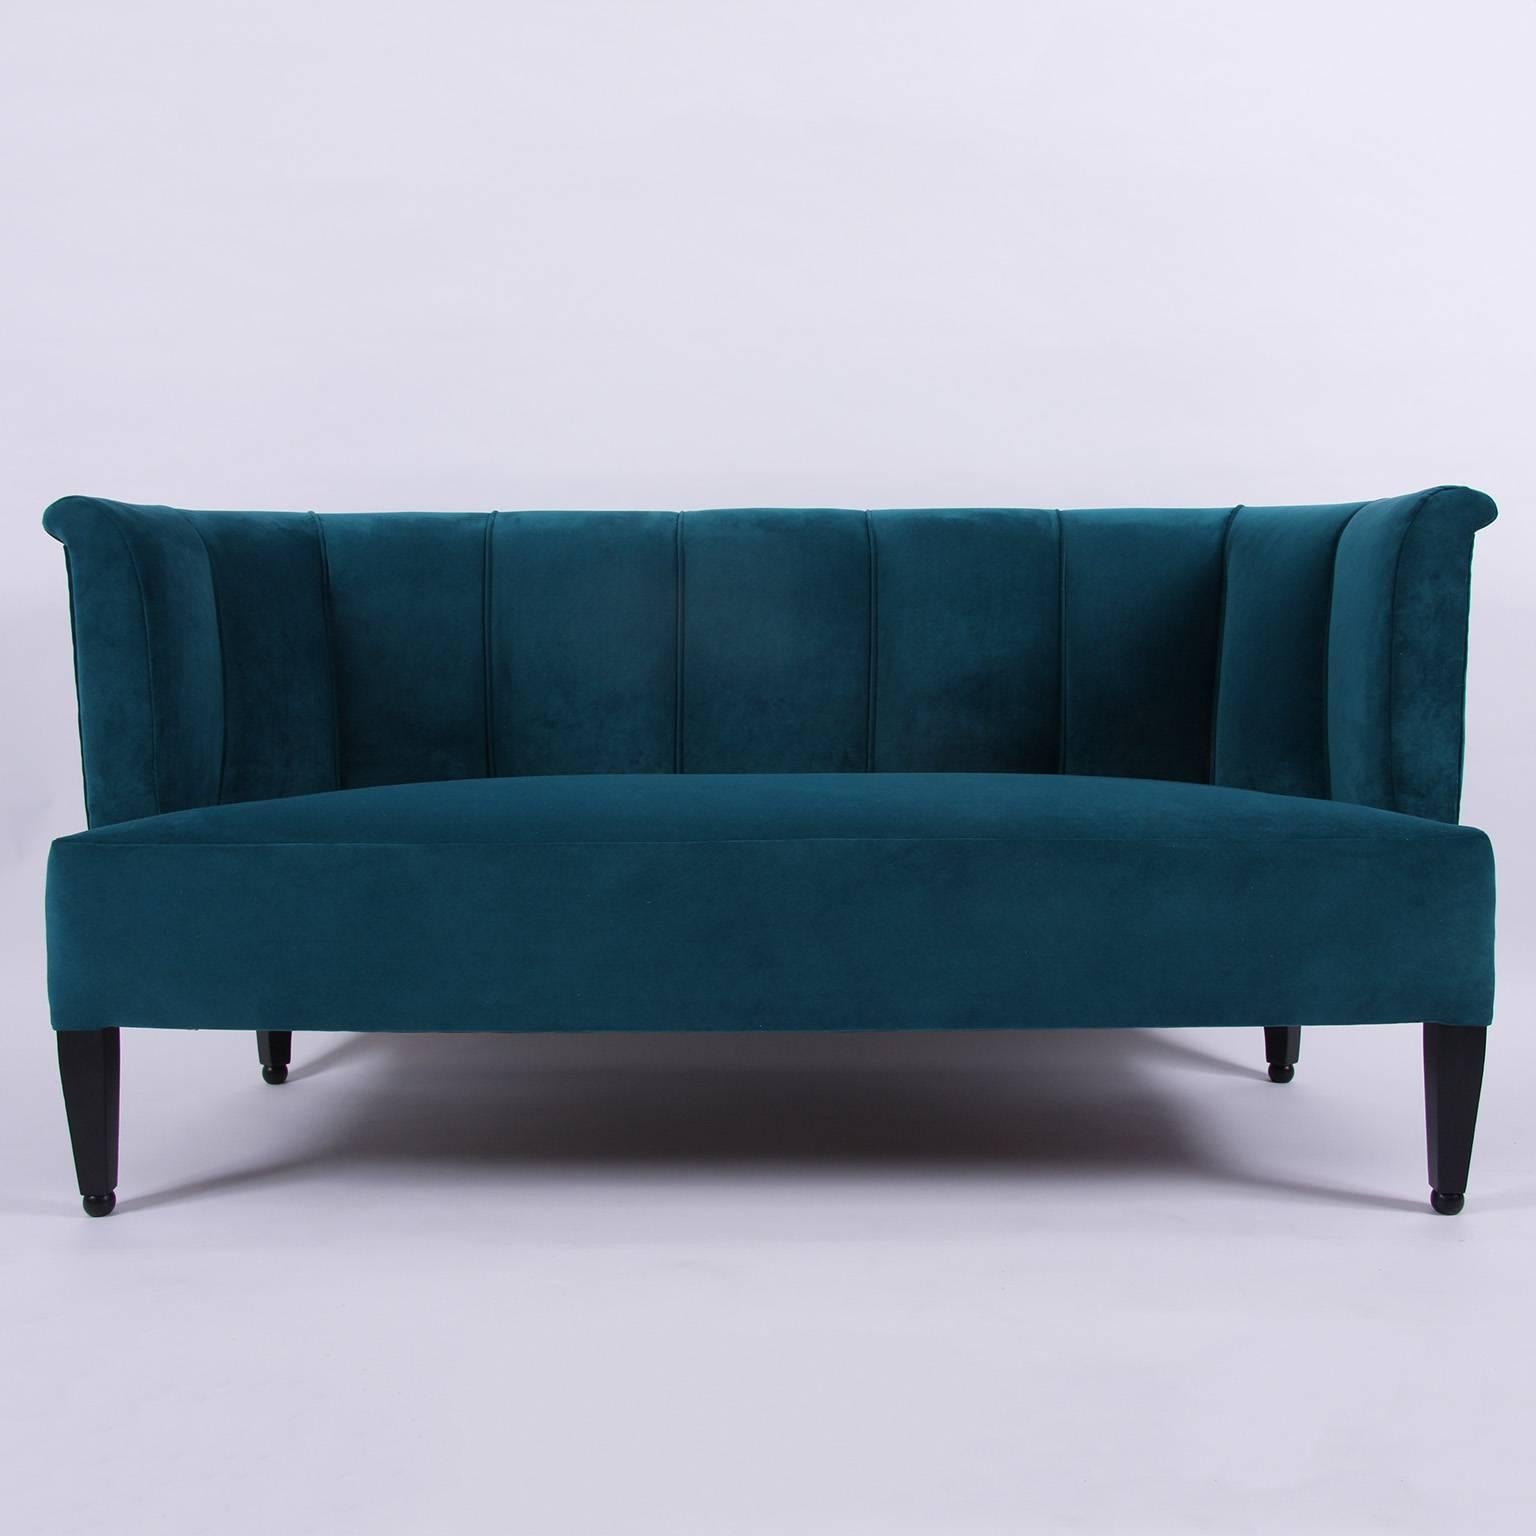 A sofa designed by Josef Hoffmann (1870-1956) by Whittman, newly re-upholstered in a teal velvet. On square tapering legs.

In 1912 Hoffman designed a suite of furniture for the music room of Dr. Hugo Koller in Vienna. This sofa was derived from